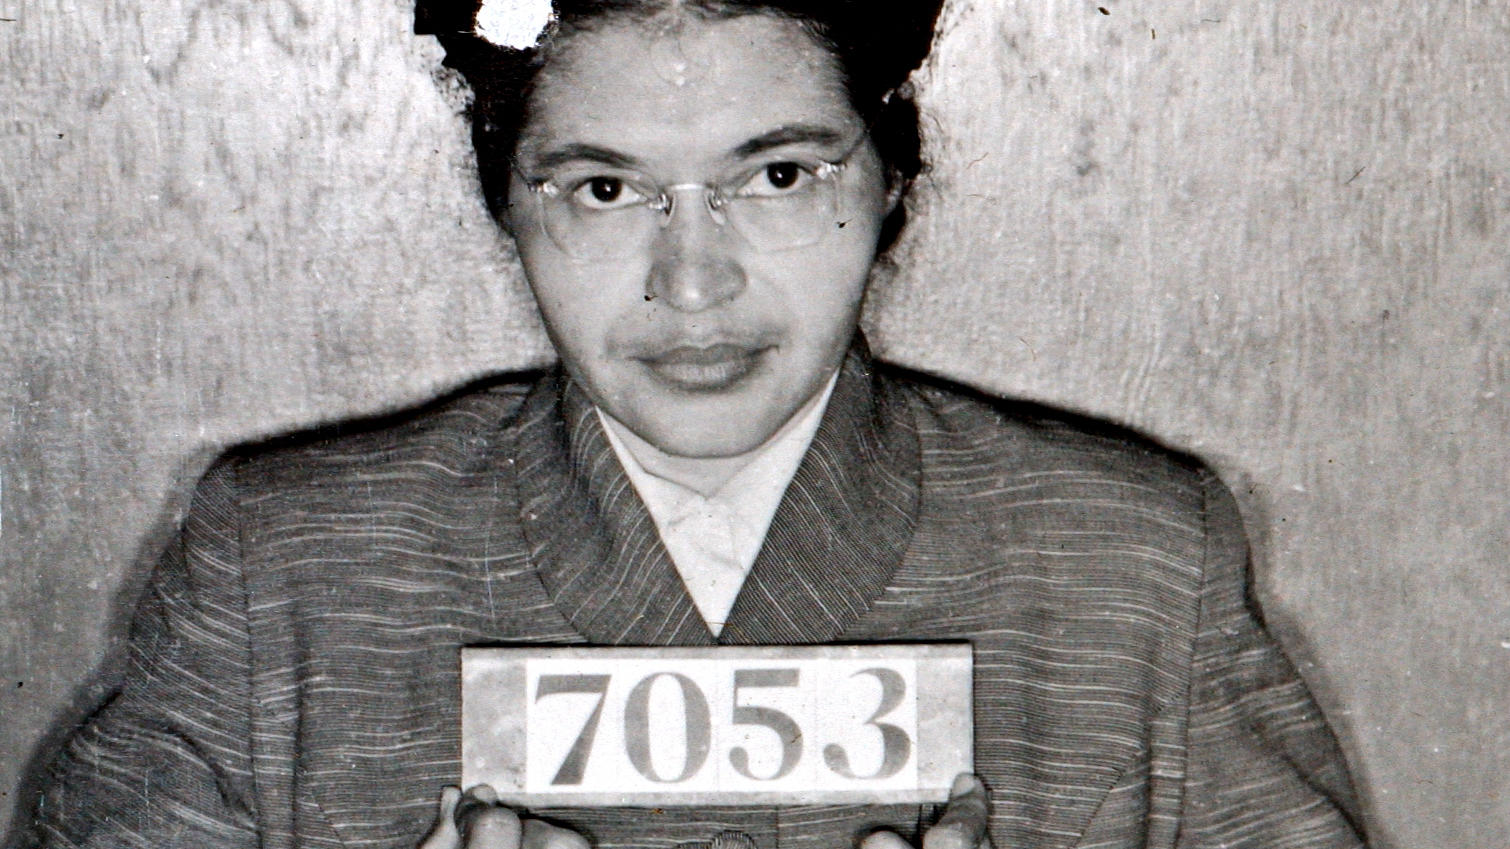 A Montgomery (Ala.) Sheriff's Department booking photo of Rosa Parks taken Feb 22, 1956, after she was arrested for refusing to give up her seat on a bus for a white passenger on Dec. 1, 1955 in Montgomery, Ala.  (AP Photo/Montgomery County Sheriff's